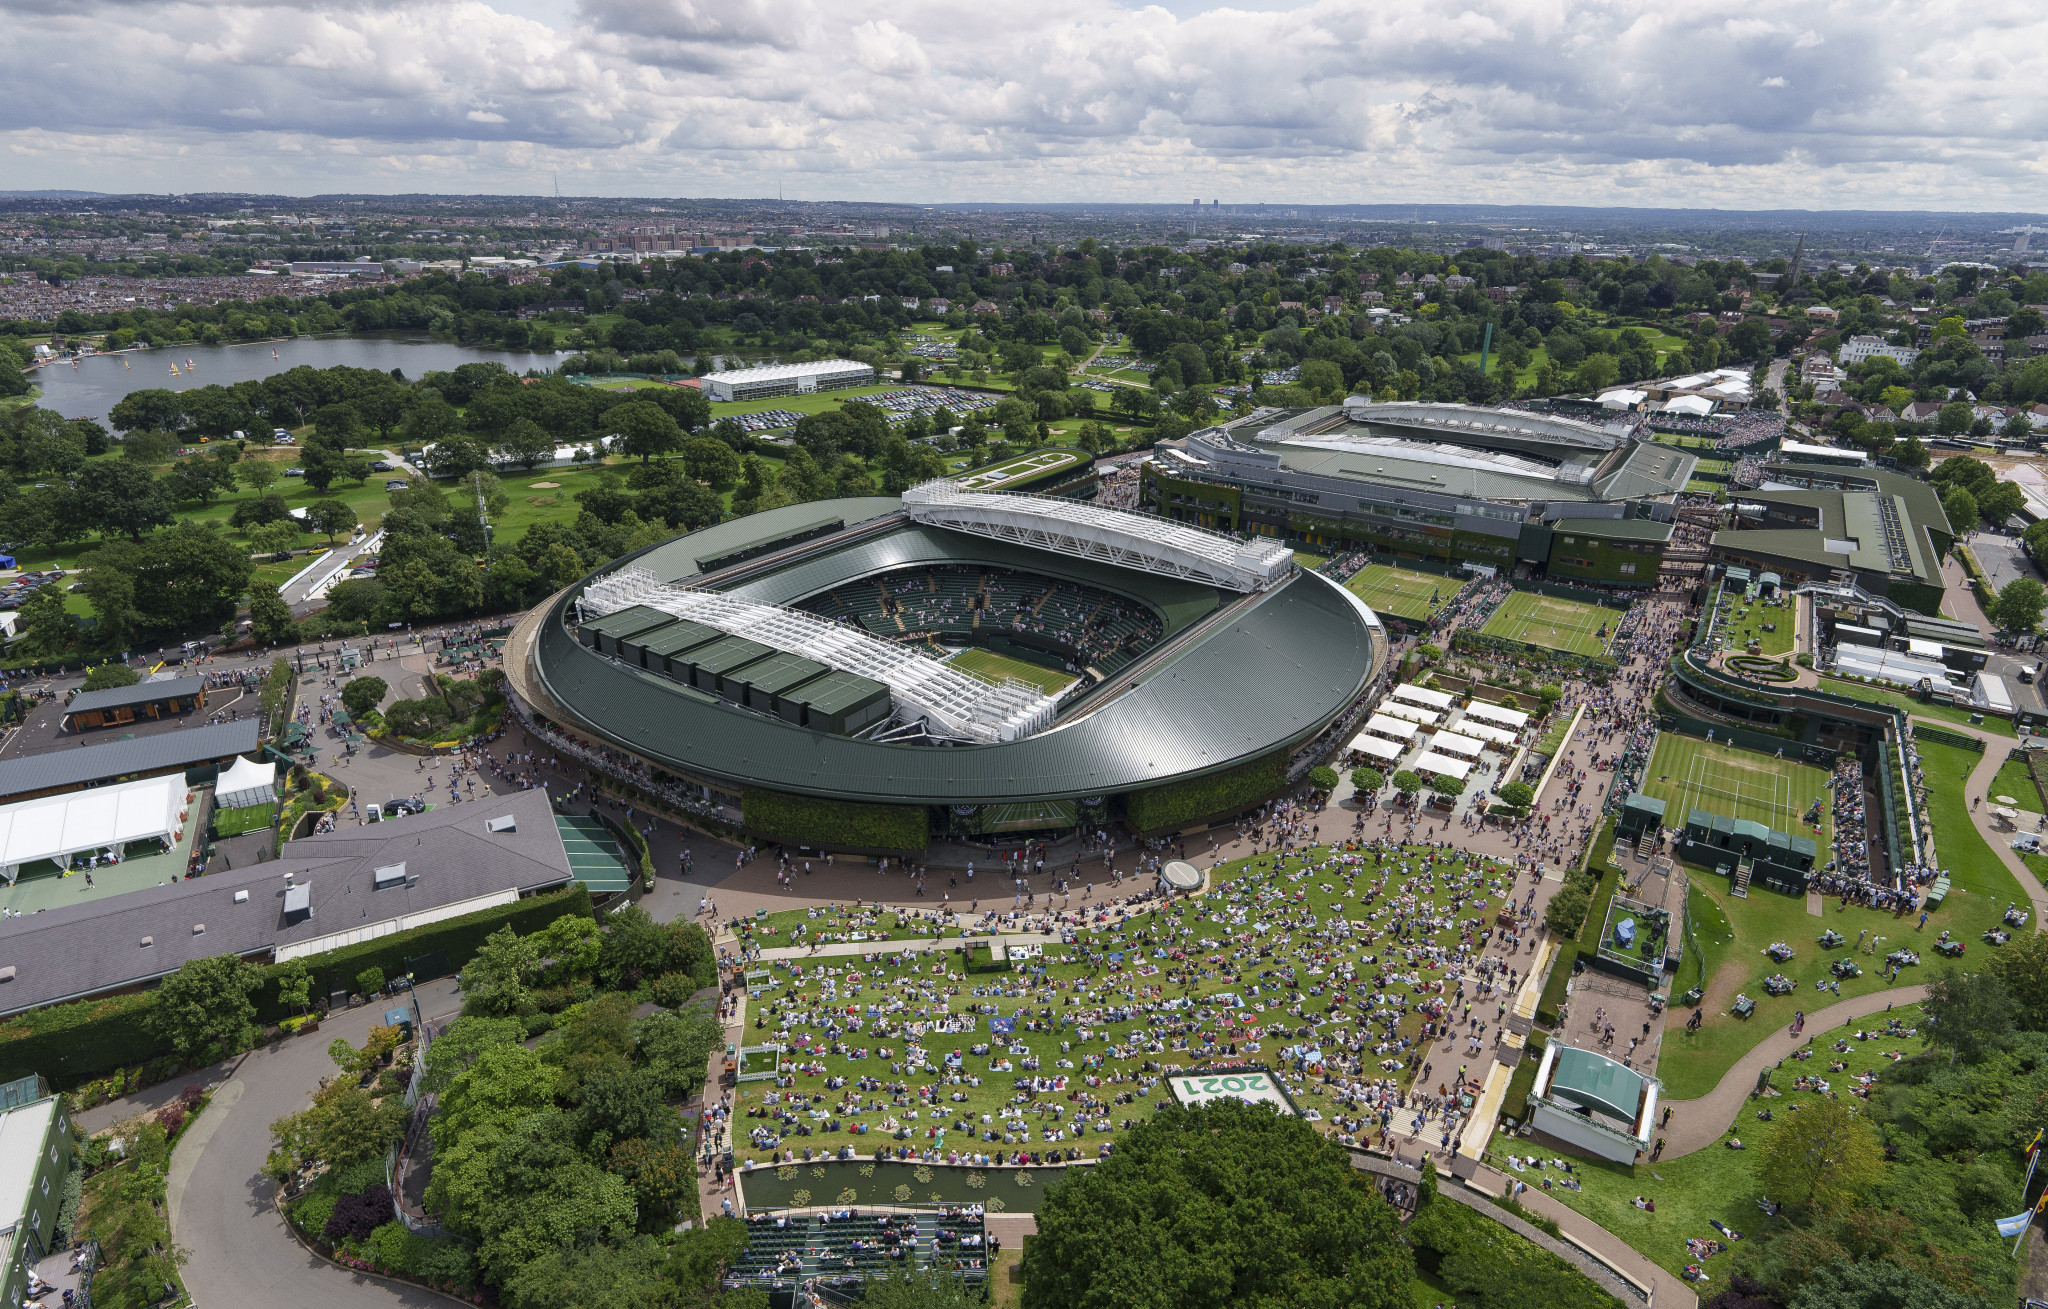 In order to compete at this year's Wimbledon, players from the countries must sign declarations of neutrality and not express support for the war  ©Getty Images